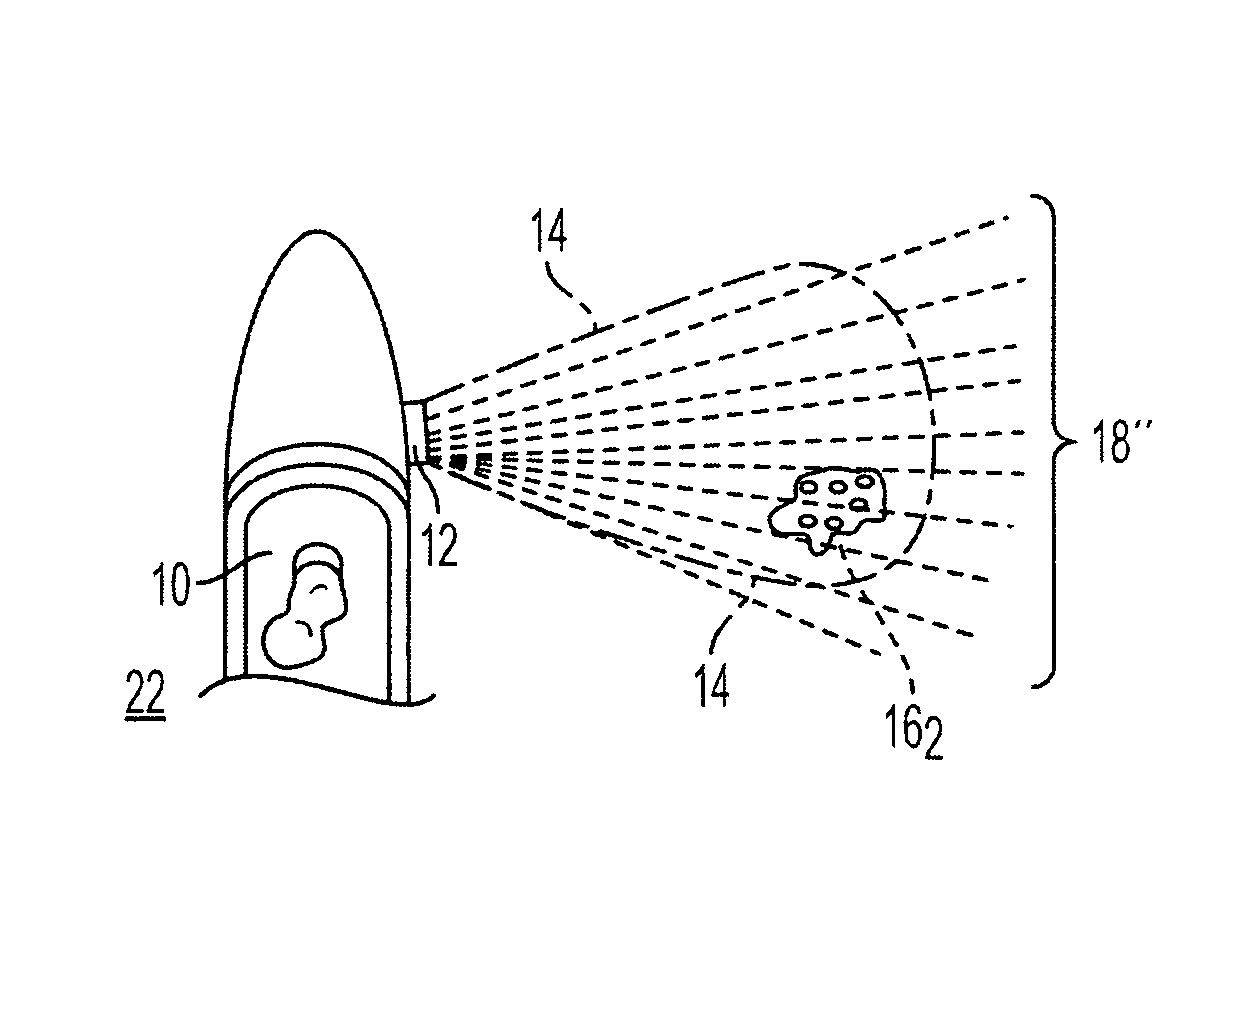 Apparatus and method for compensating images for differences in aspect